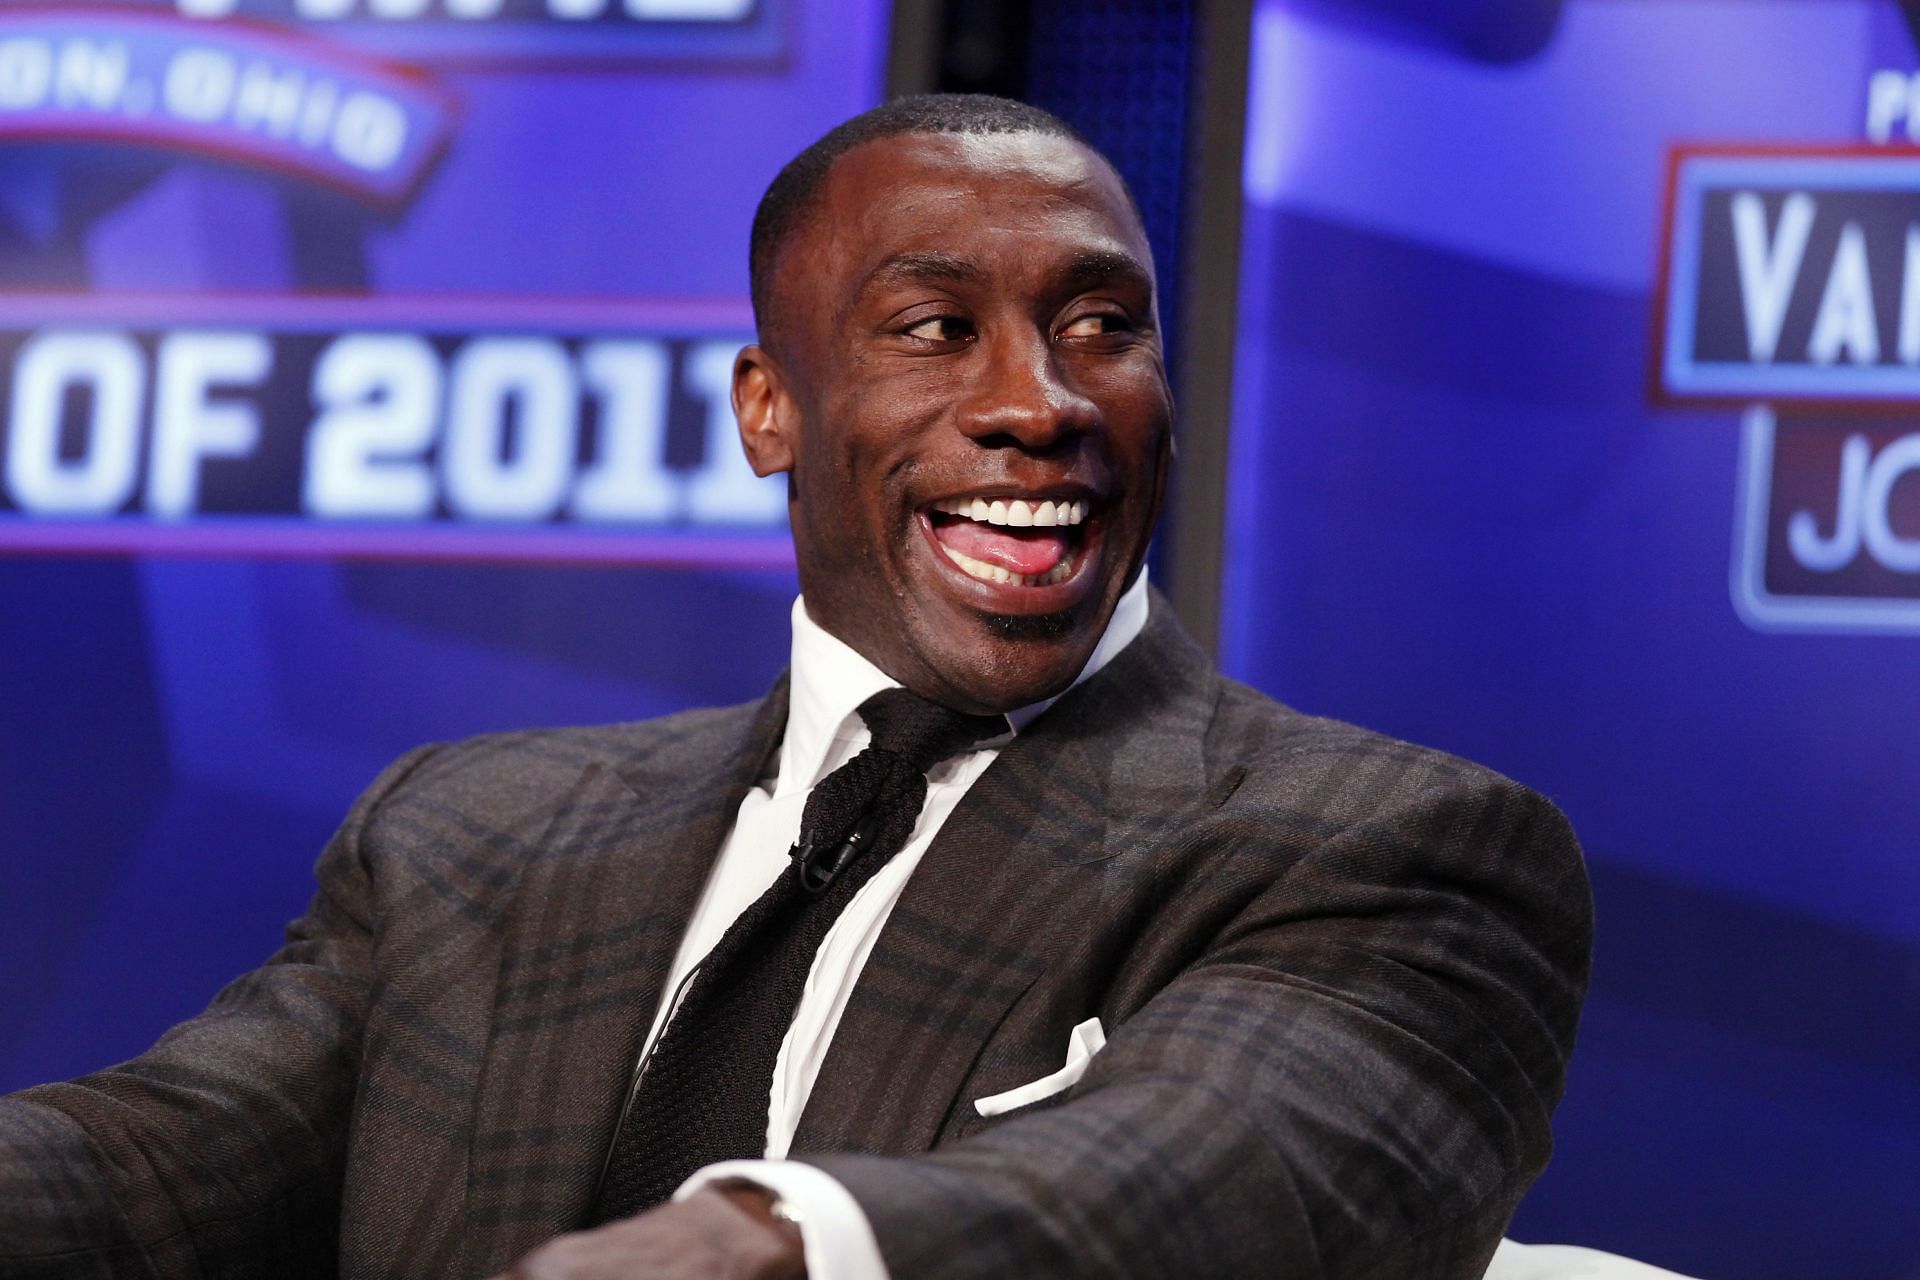 NFL legend and sports personality Shannon Sharpe